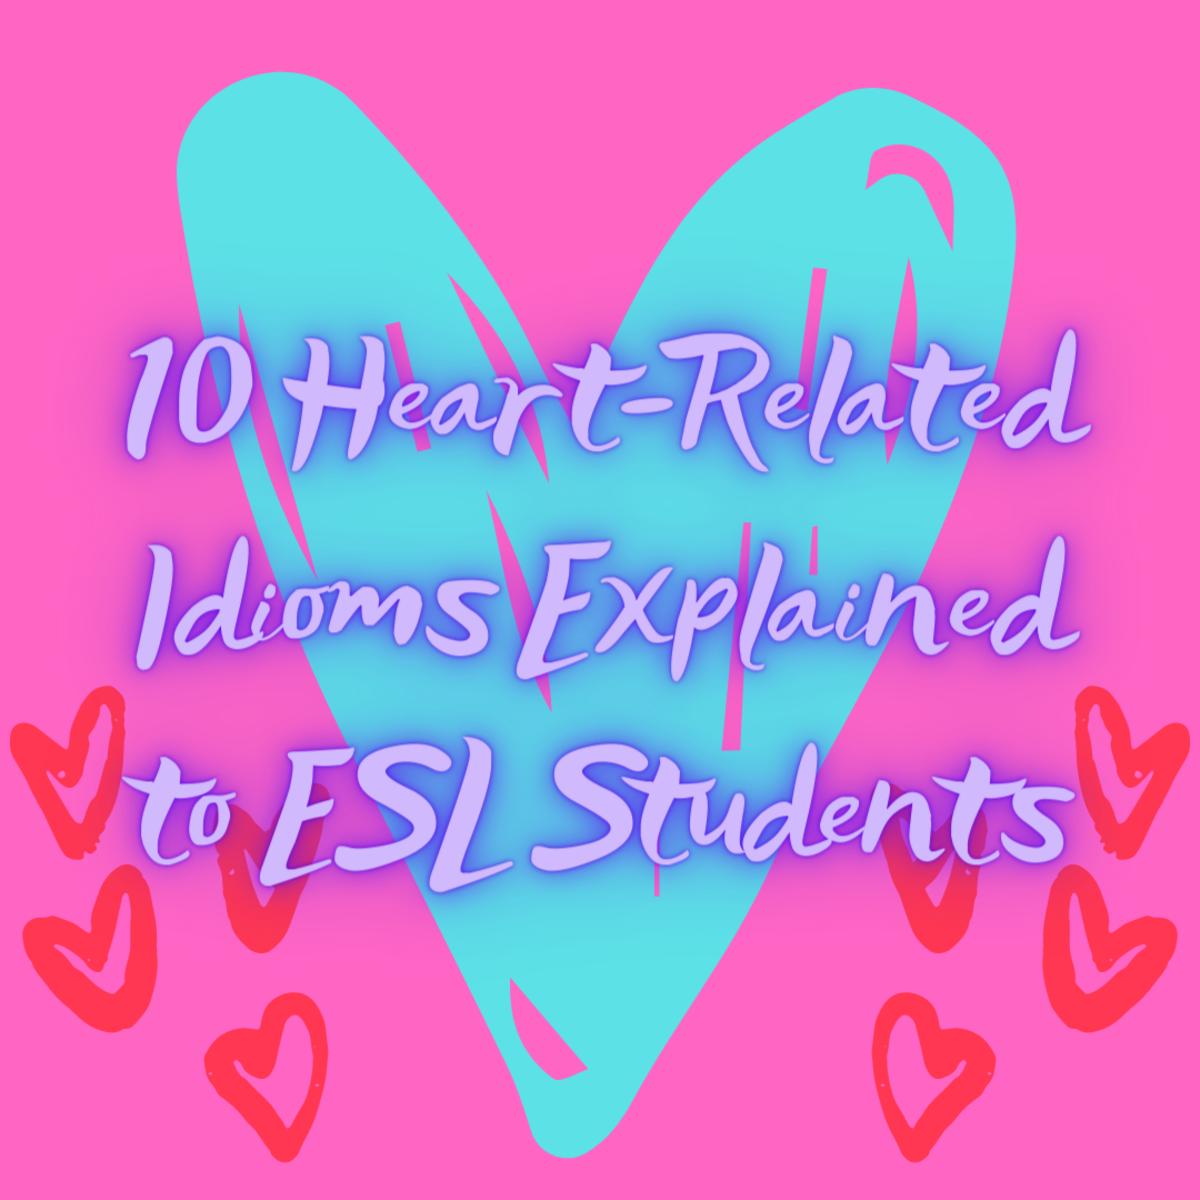 Read on to learn 10 heart idioms in English. Idioms can be difficult for ESL students to grasp, but this list will help you begin to expand your conversational English!